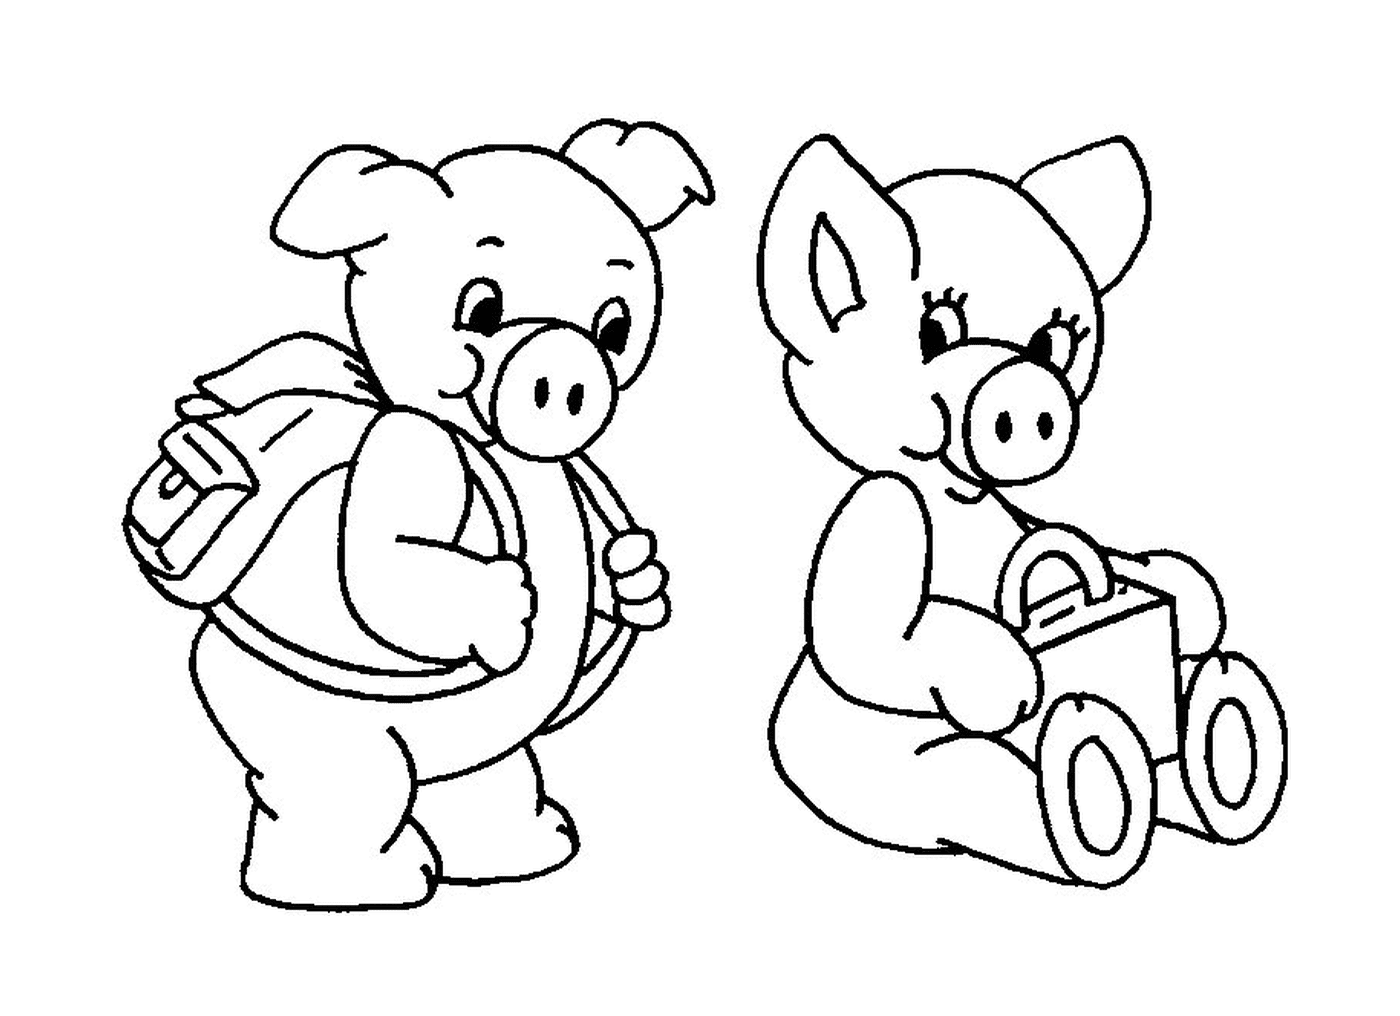  Two pigs sitting and standing in line 